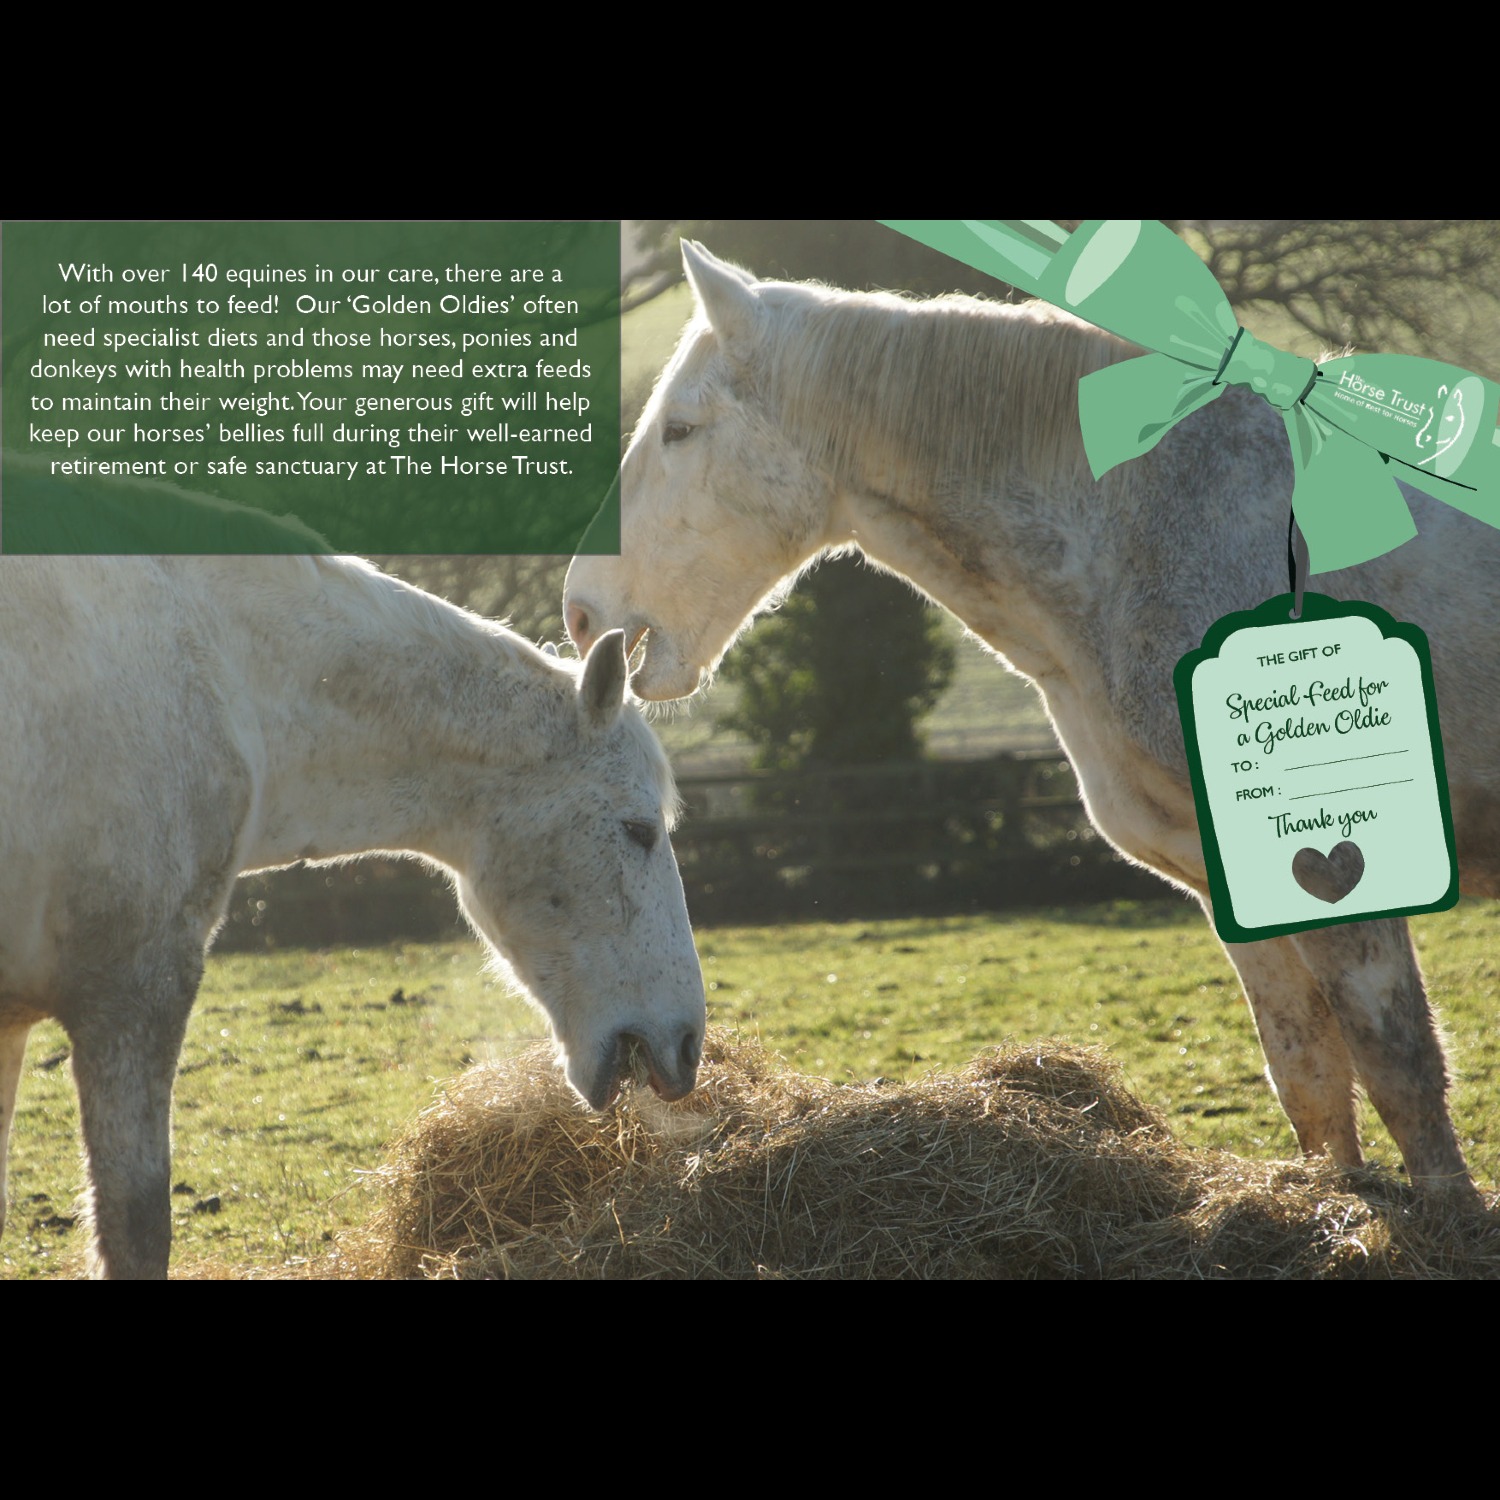 Give the gift of specialist horse feed